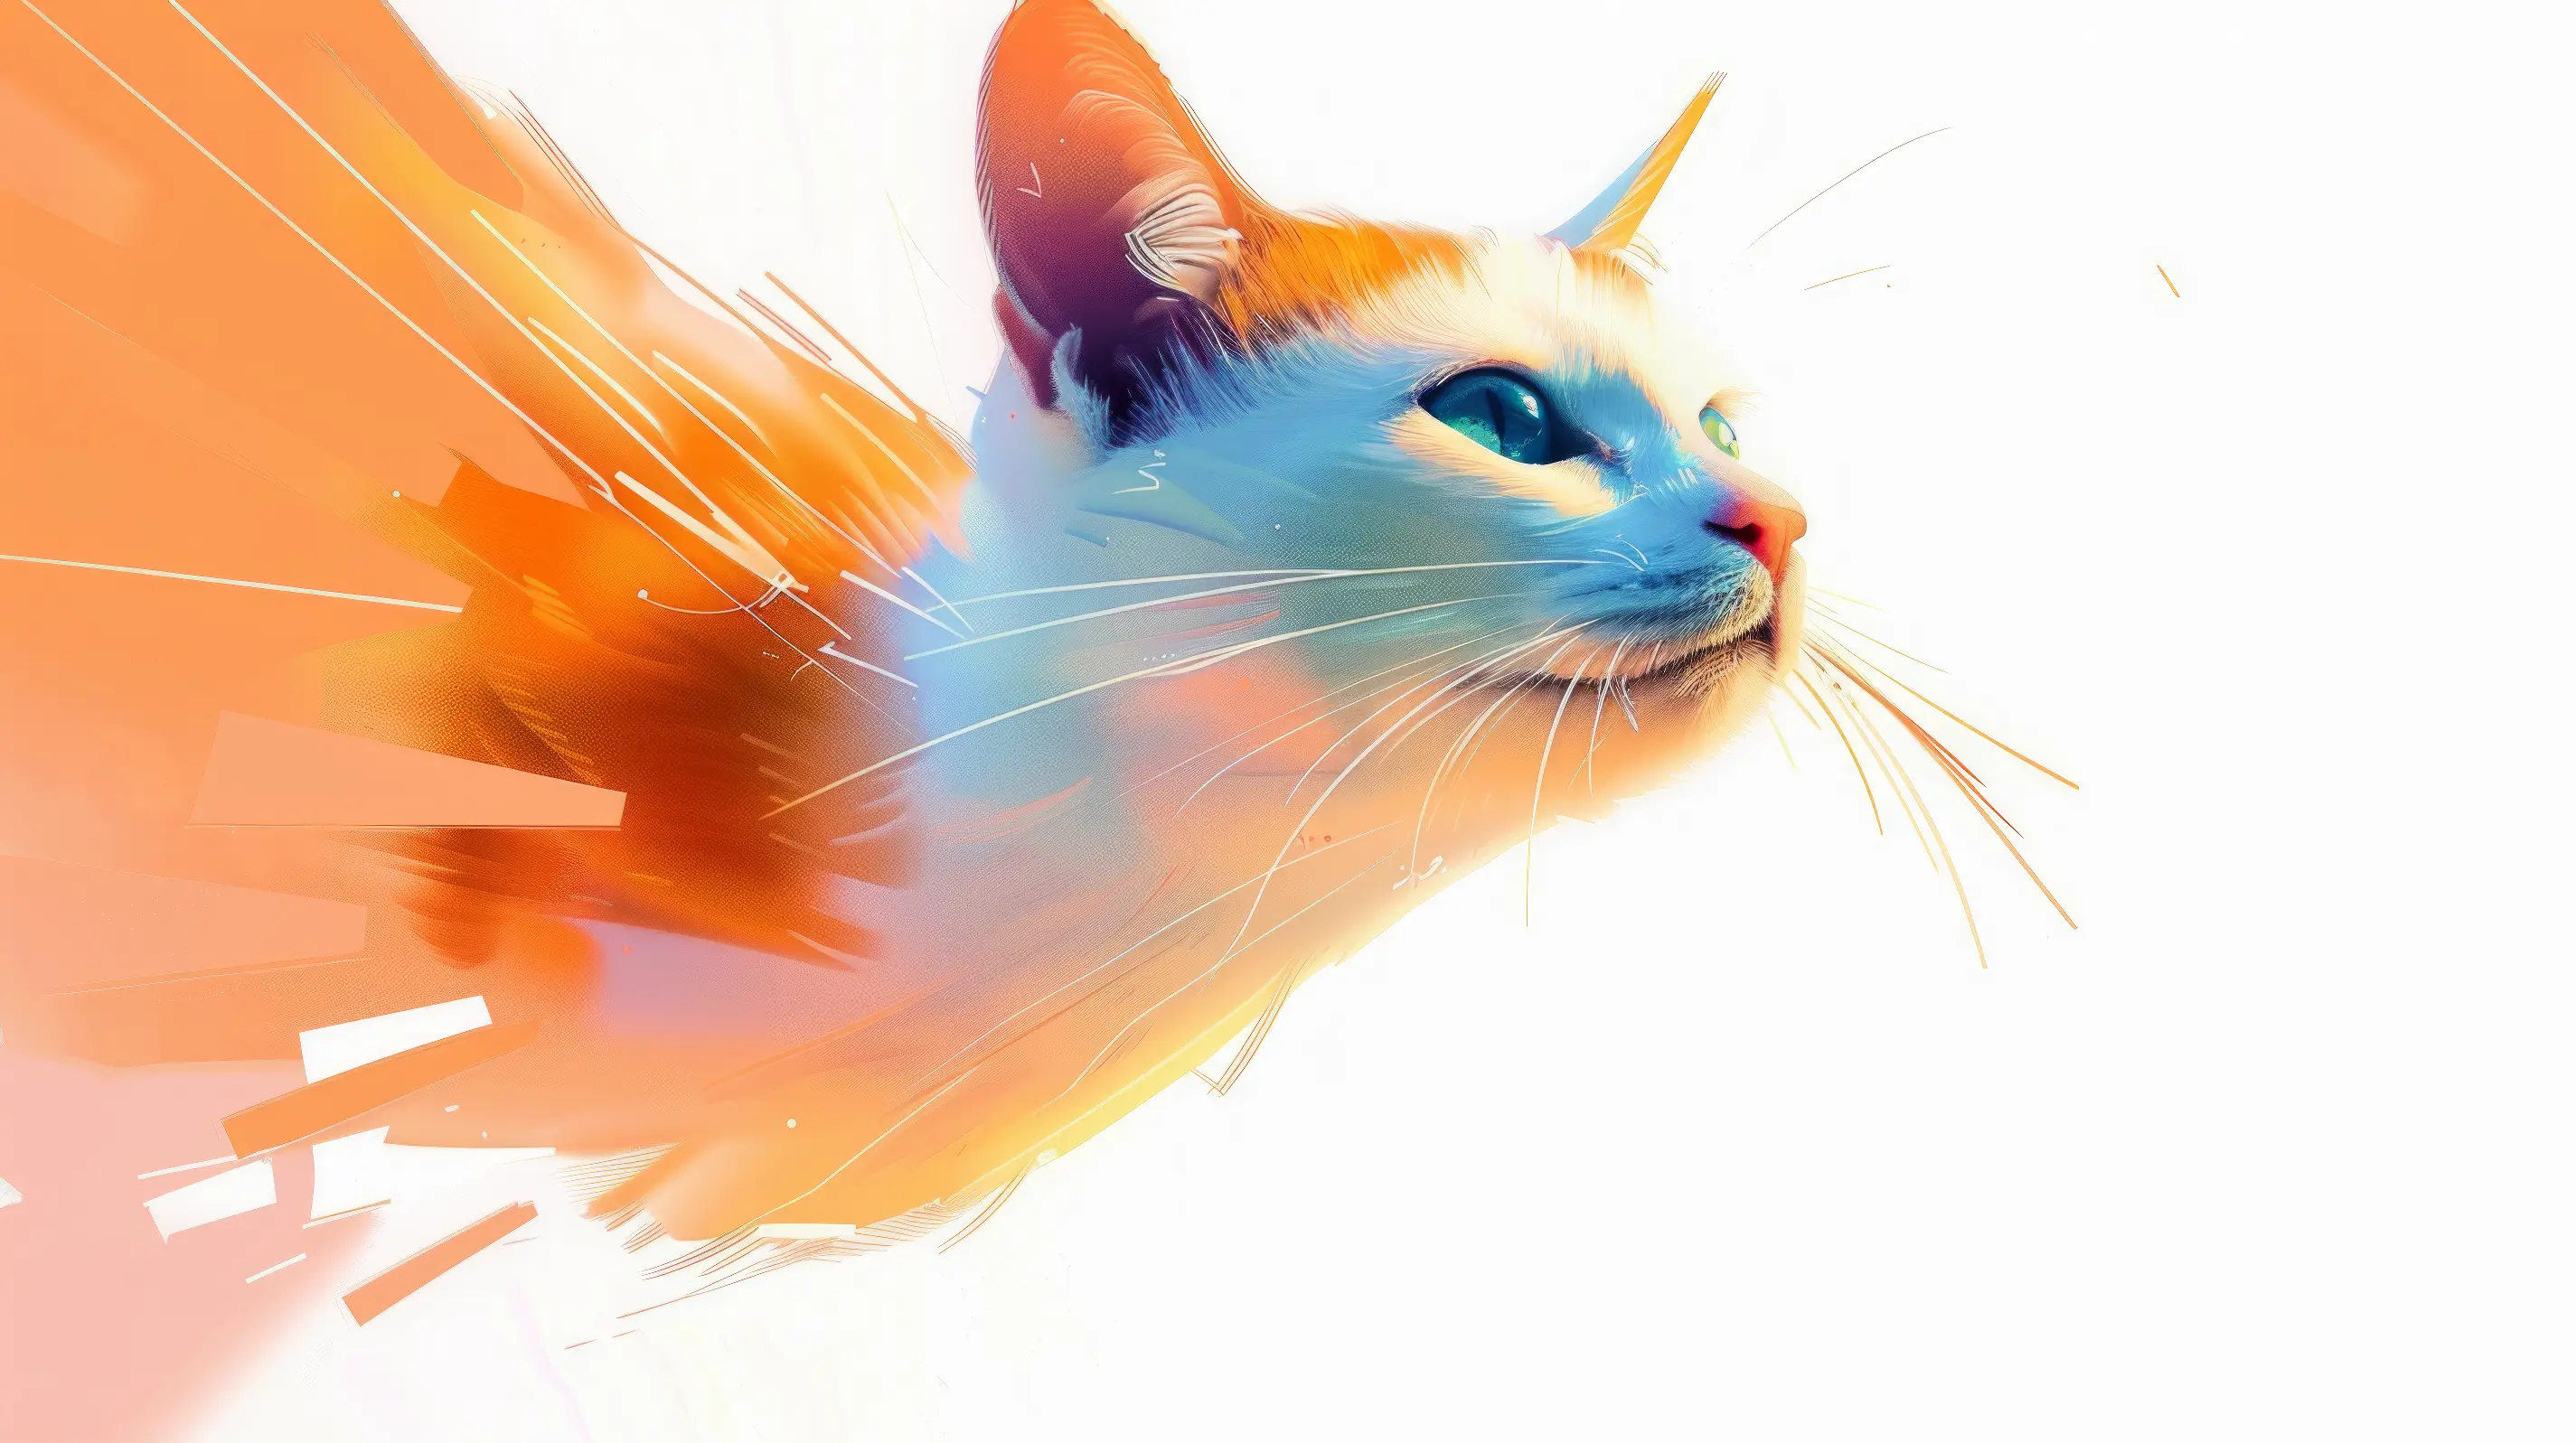 Colourful, abstract digital art of a cat